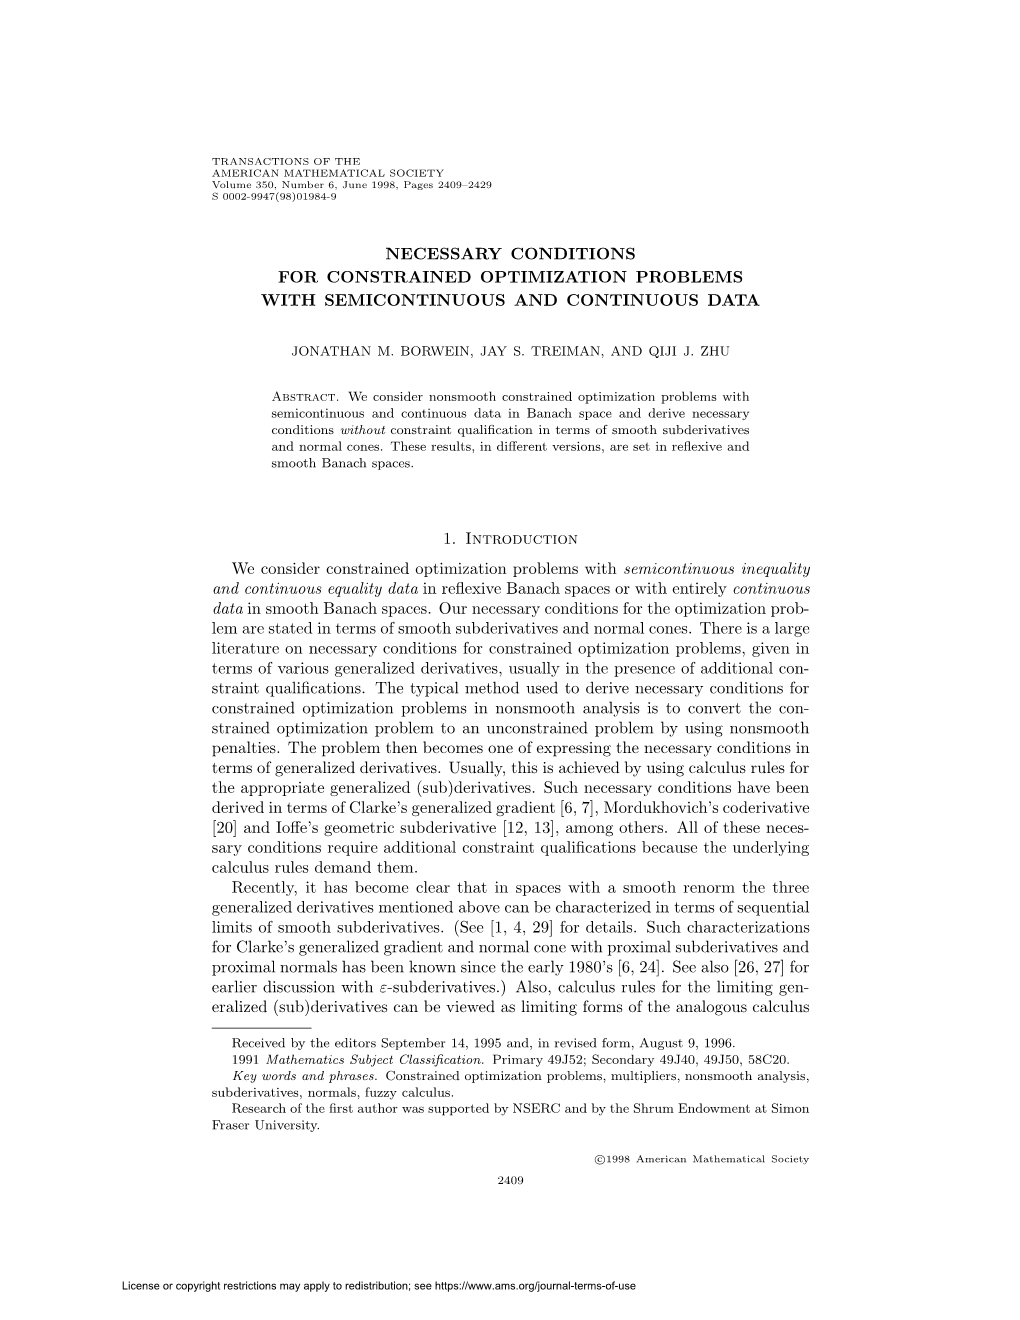 NECESSARY CONDITIONS for CONSTRAINED OPTIMIZATION PROBLEMS with SEMICONTINUOUS and CONTINUOUS DATA 1. Introduction We Consider C